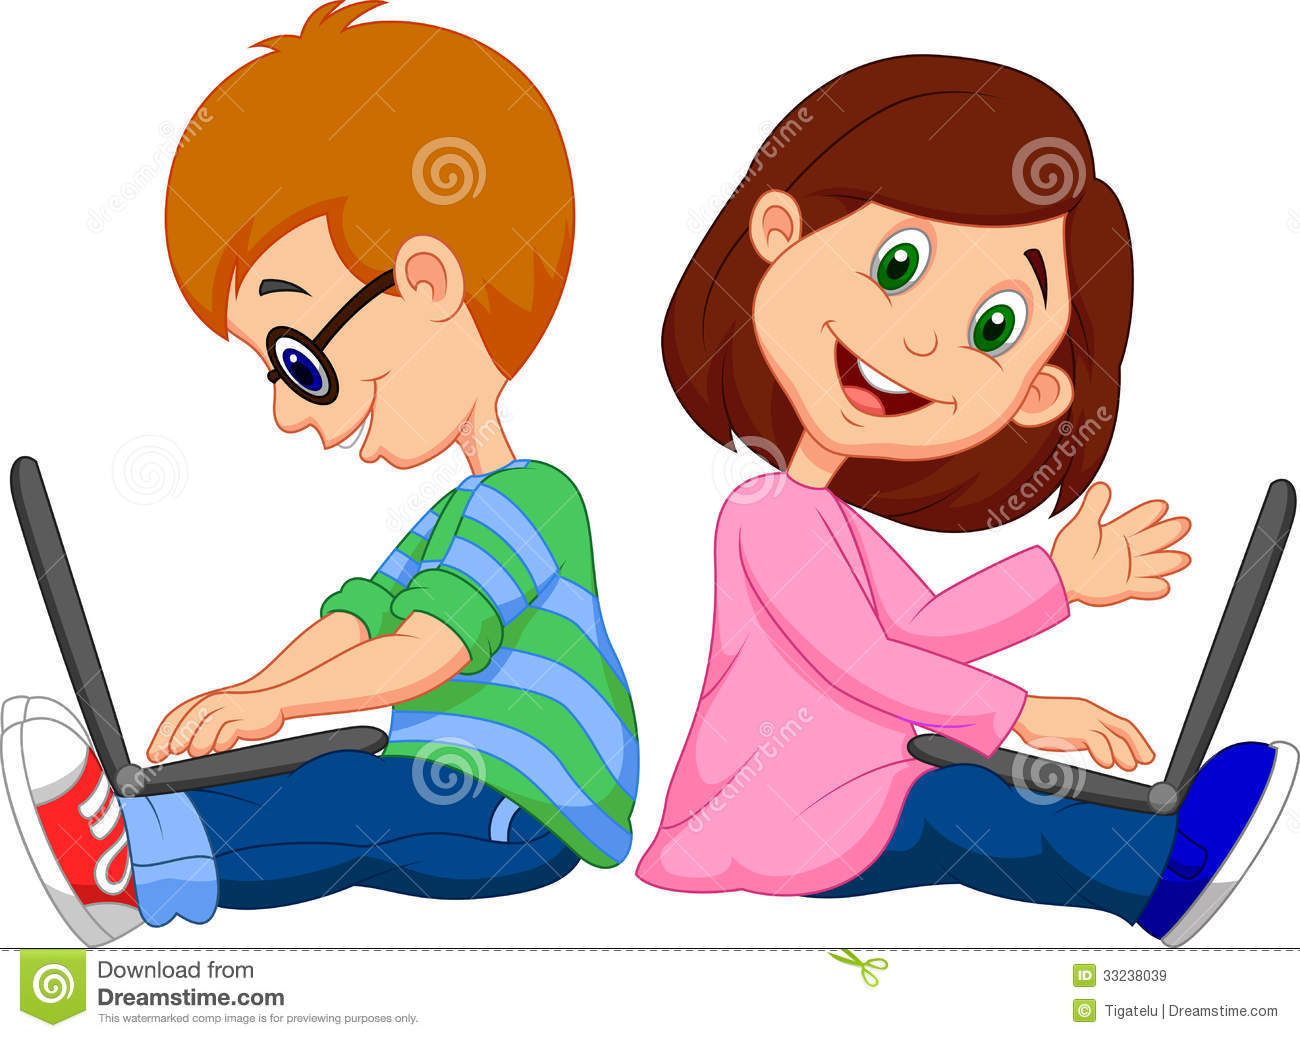 Cartoon Boy And Girl Studying With Laptop Royalty Free Stock Images